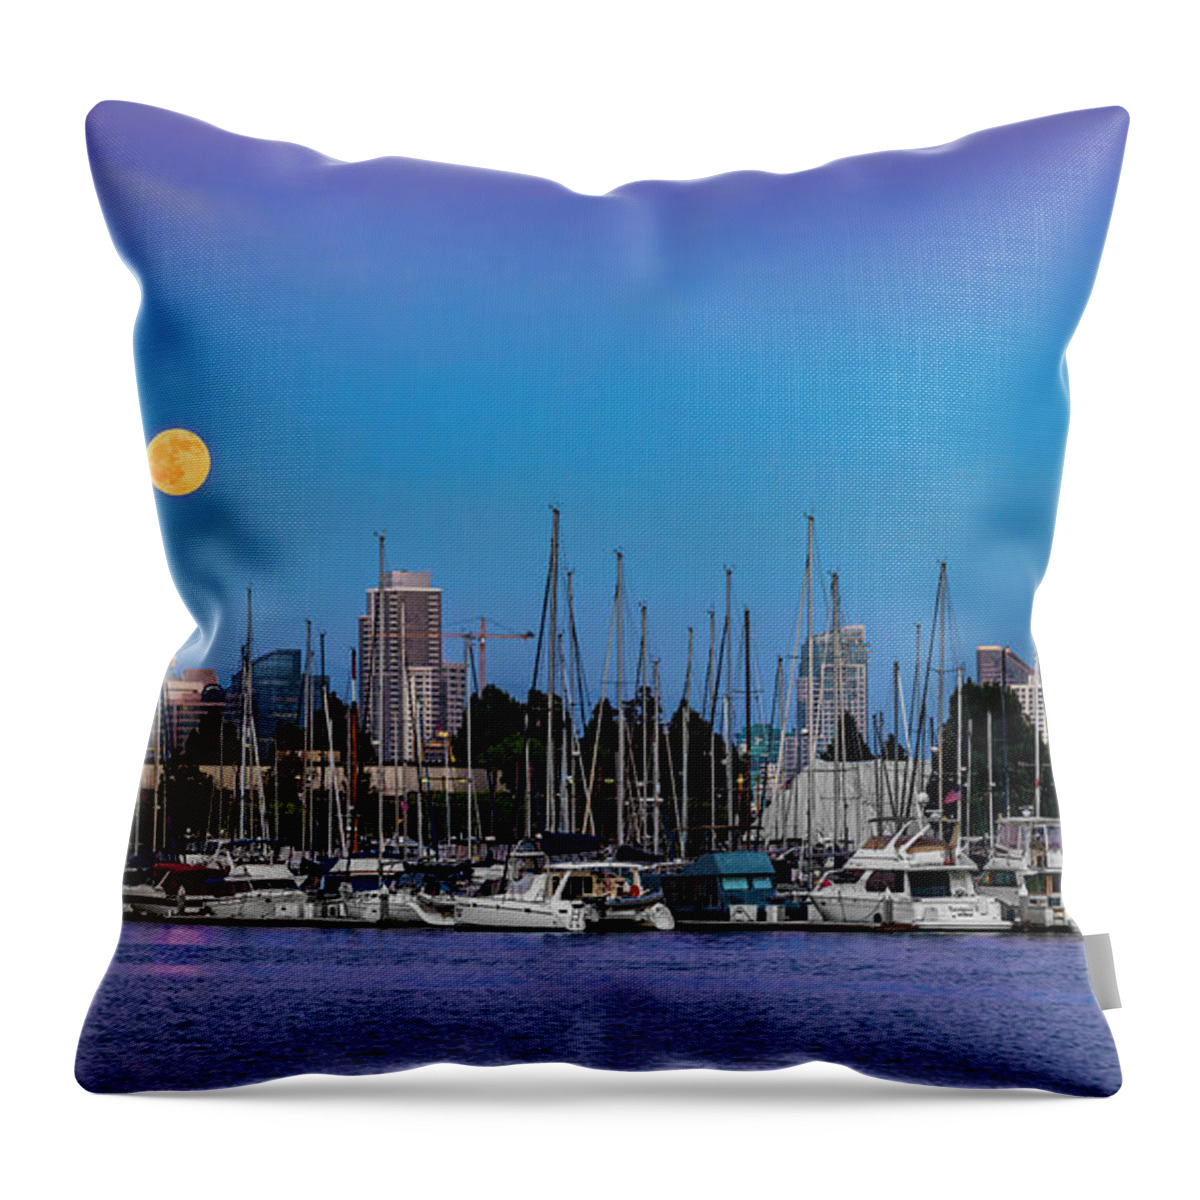 San Diego Throw Pillow featuring the photograph Perfect Evening by Dan McGeorge